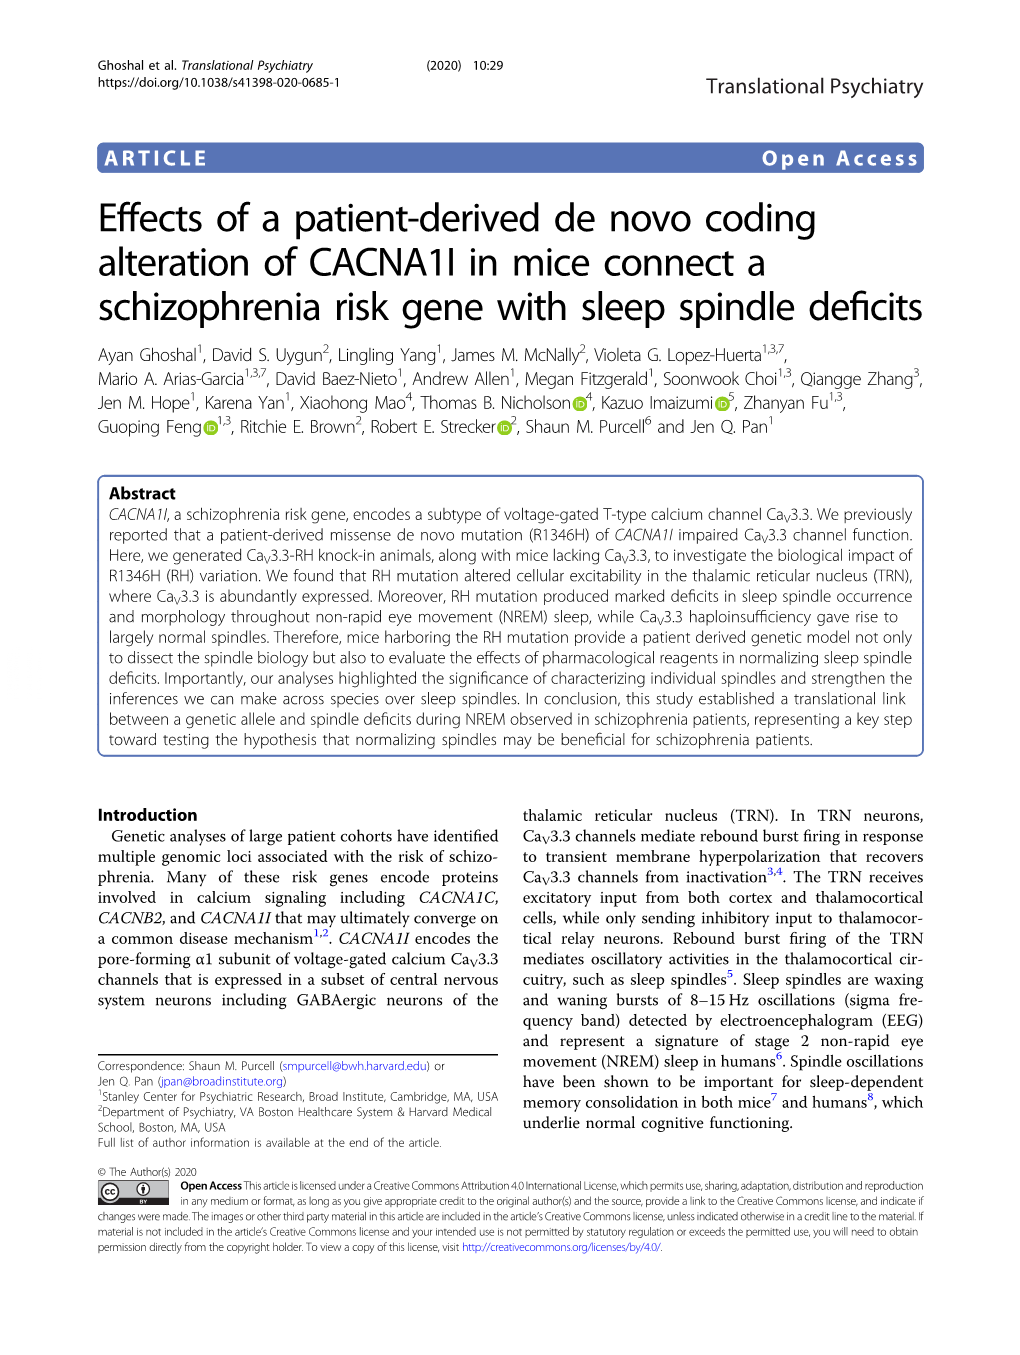 Effects of a Patient-Derived De Novo Coding Alteration of CACNA1I in Mice Connect a Schizophrenia Risk Gene with Sleep Spindle Deﬁcits Ayan Ghoshal1, David S